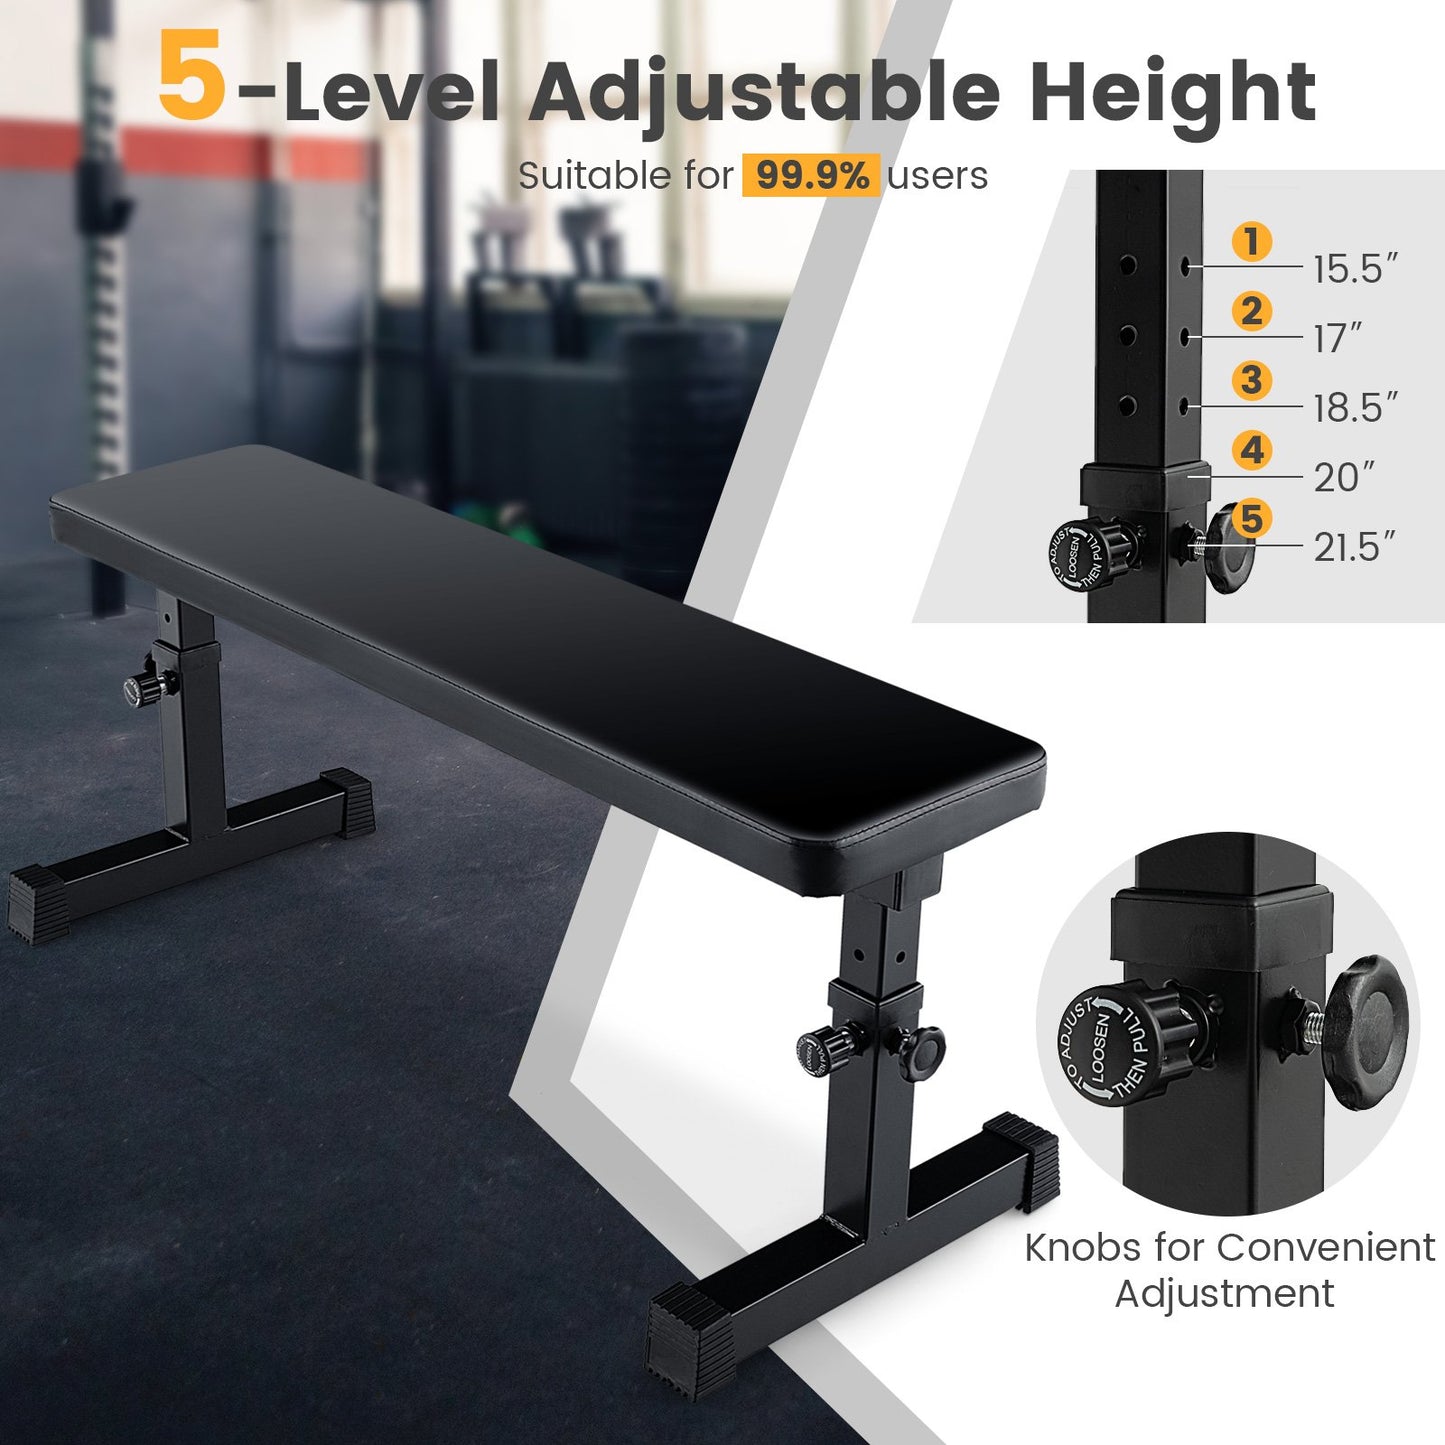 600 LBS Heavy Duty Weight Bench with 5-Level Adjustable Height, Black